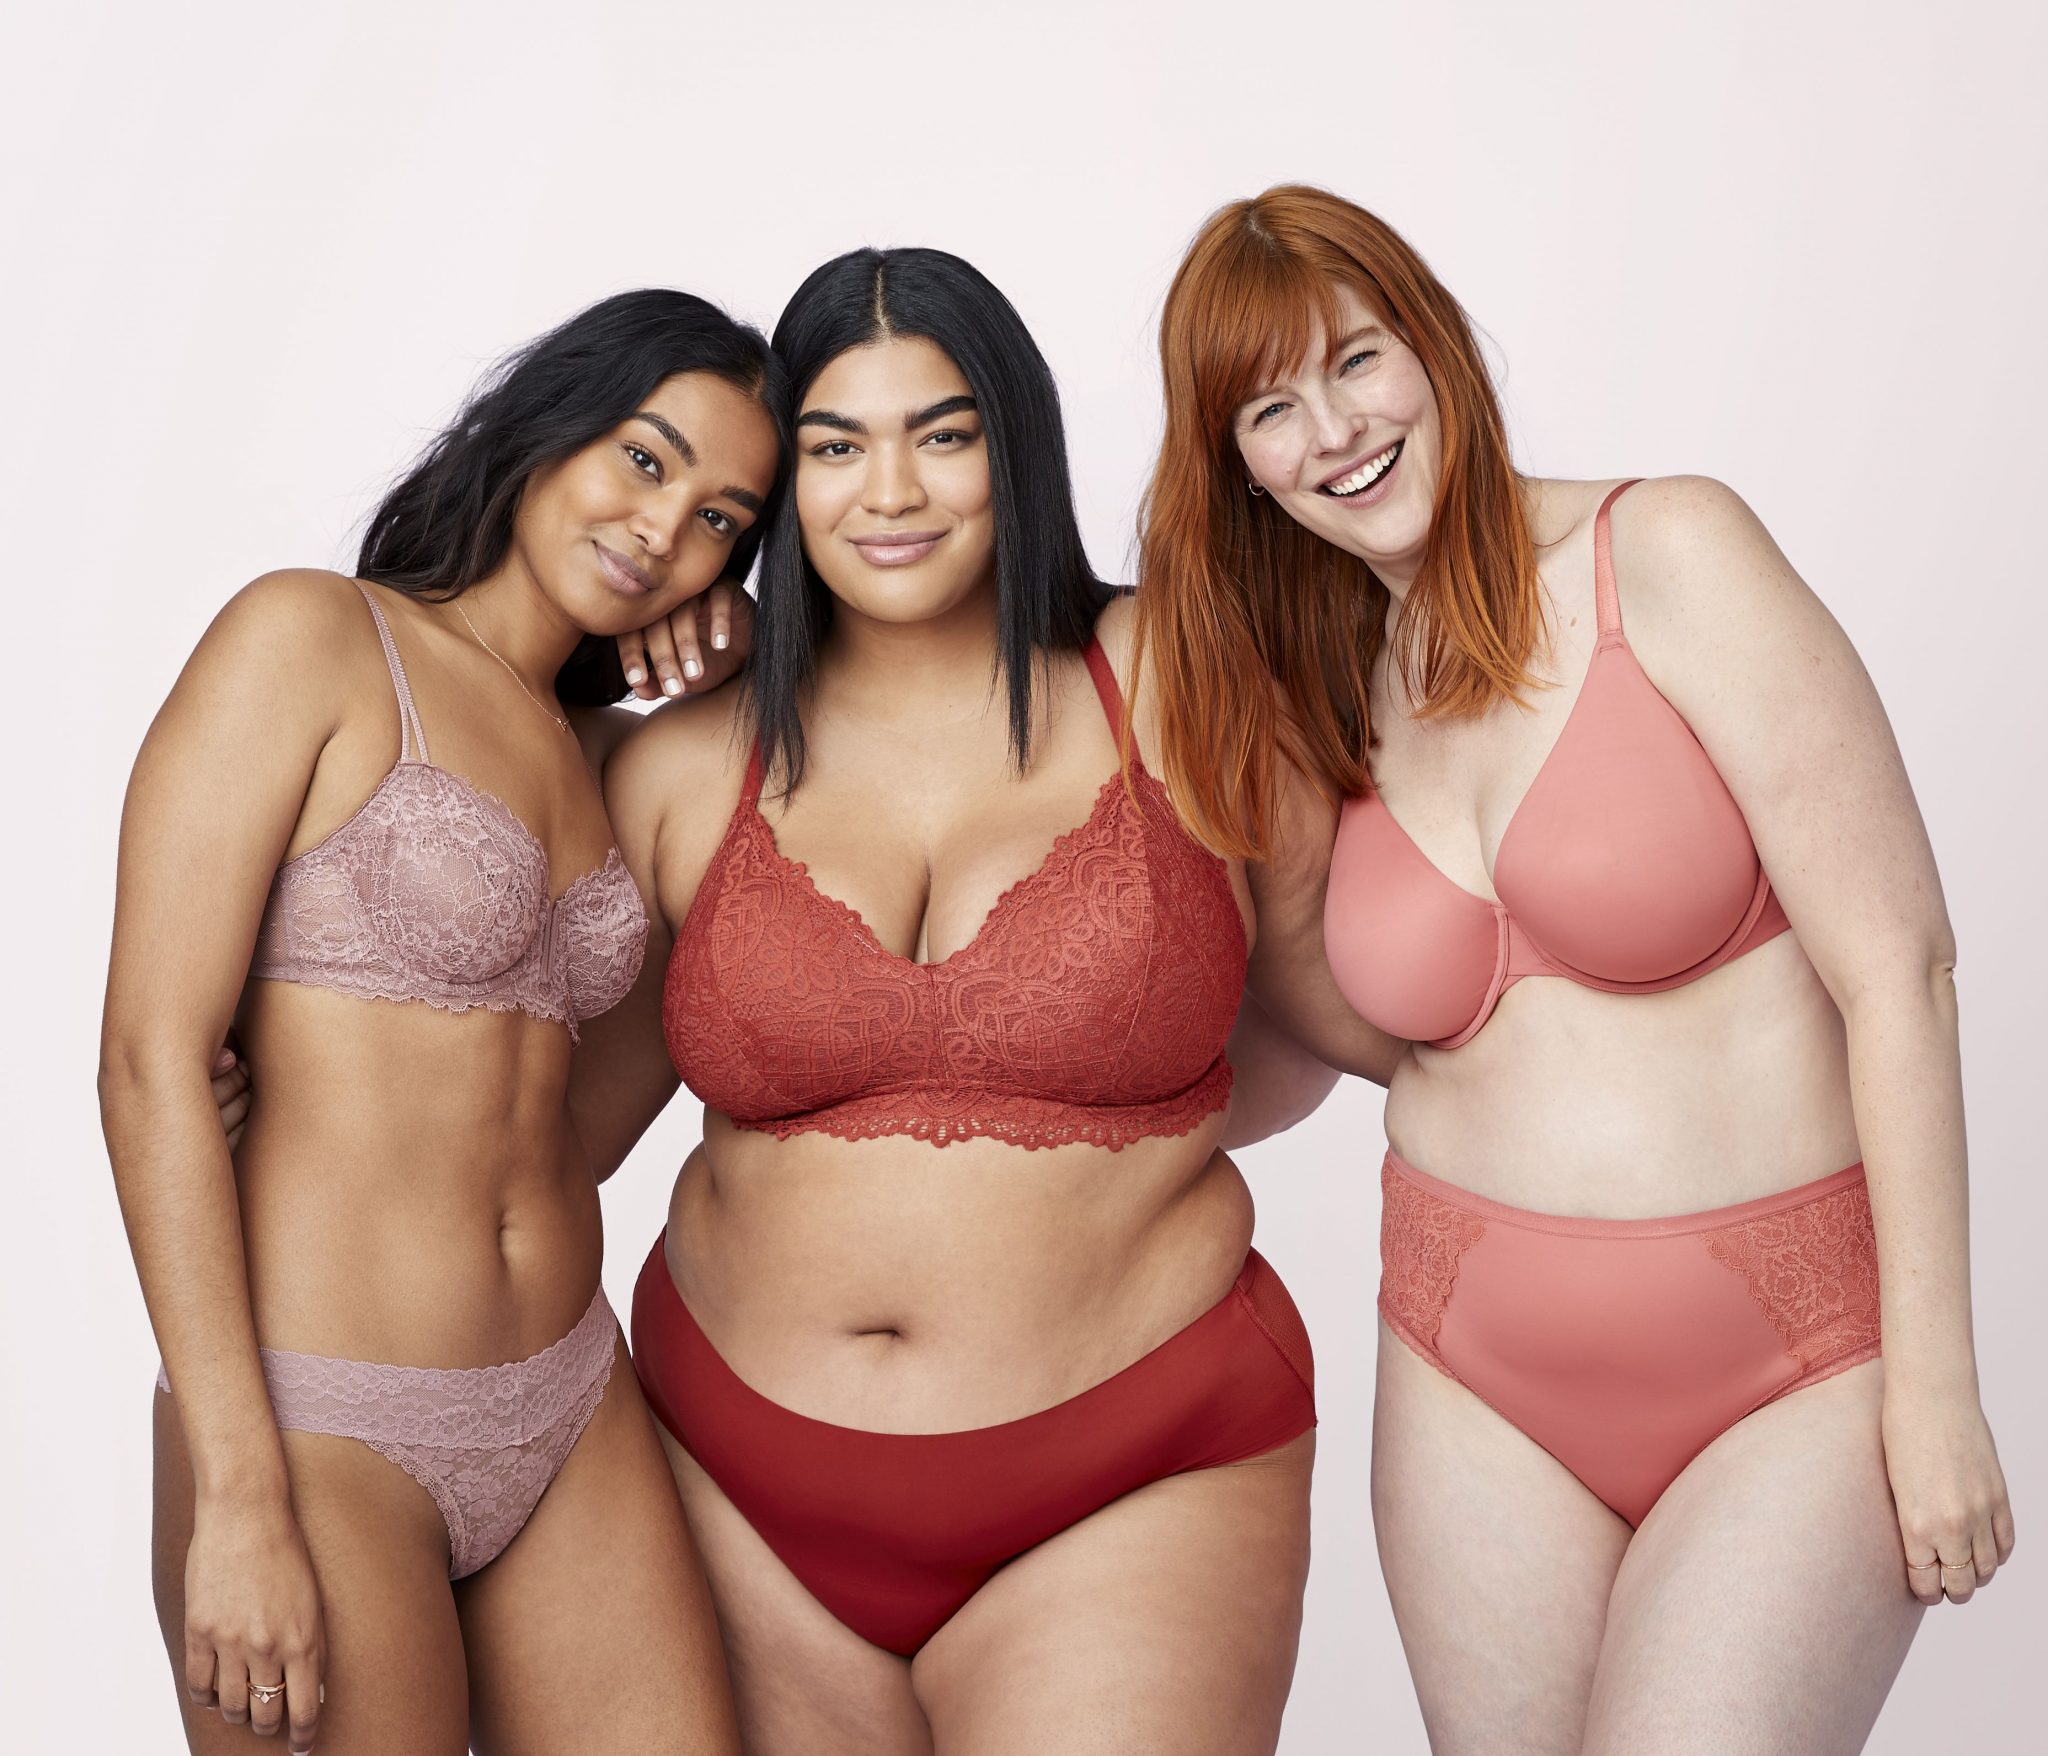 target launches new lingerie & sleepwear brands